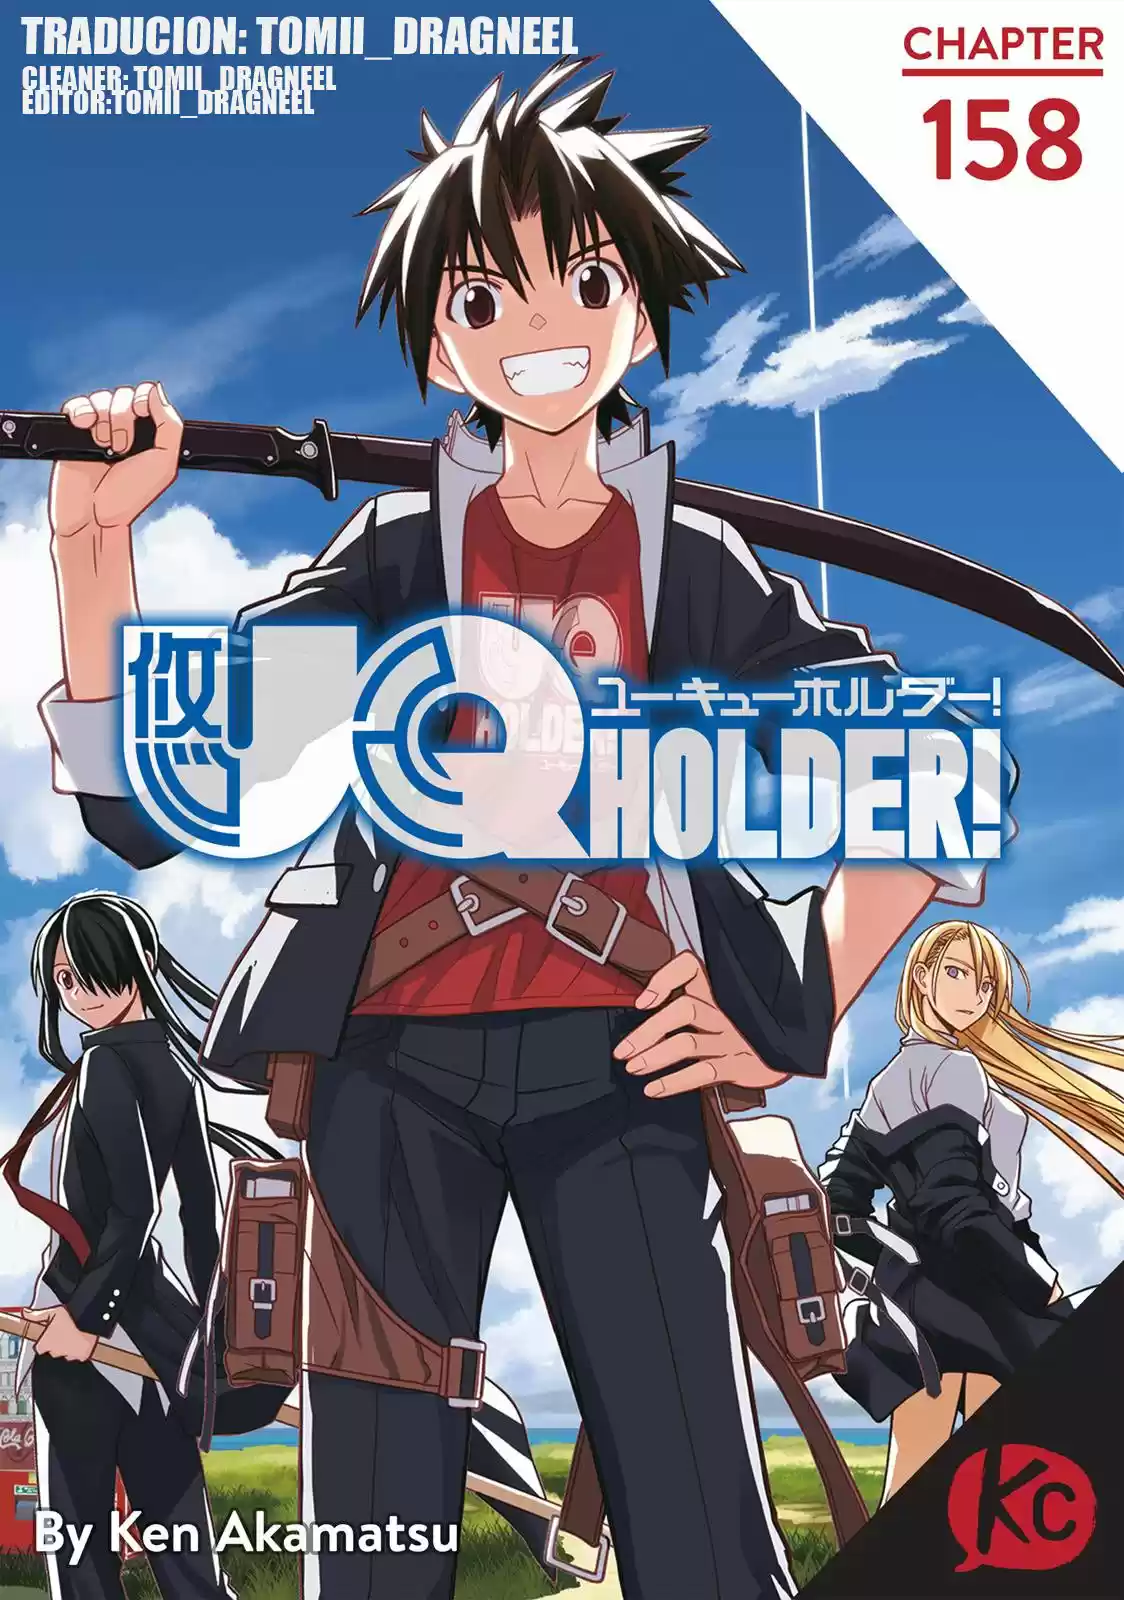 Uq Holder: Chapter 158 - Page 1